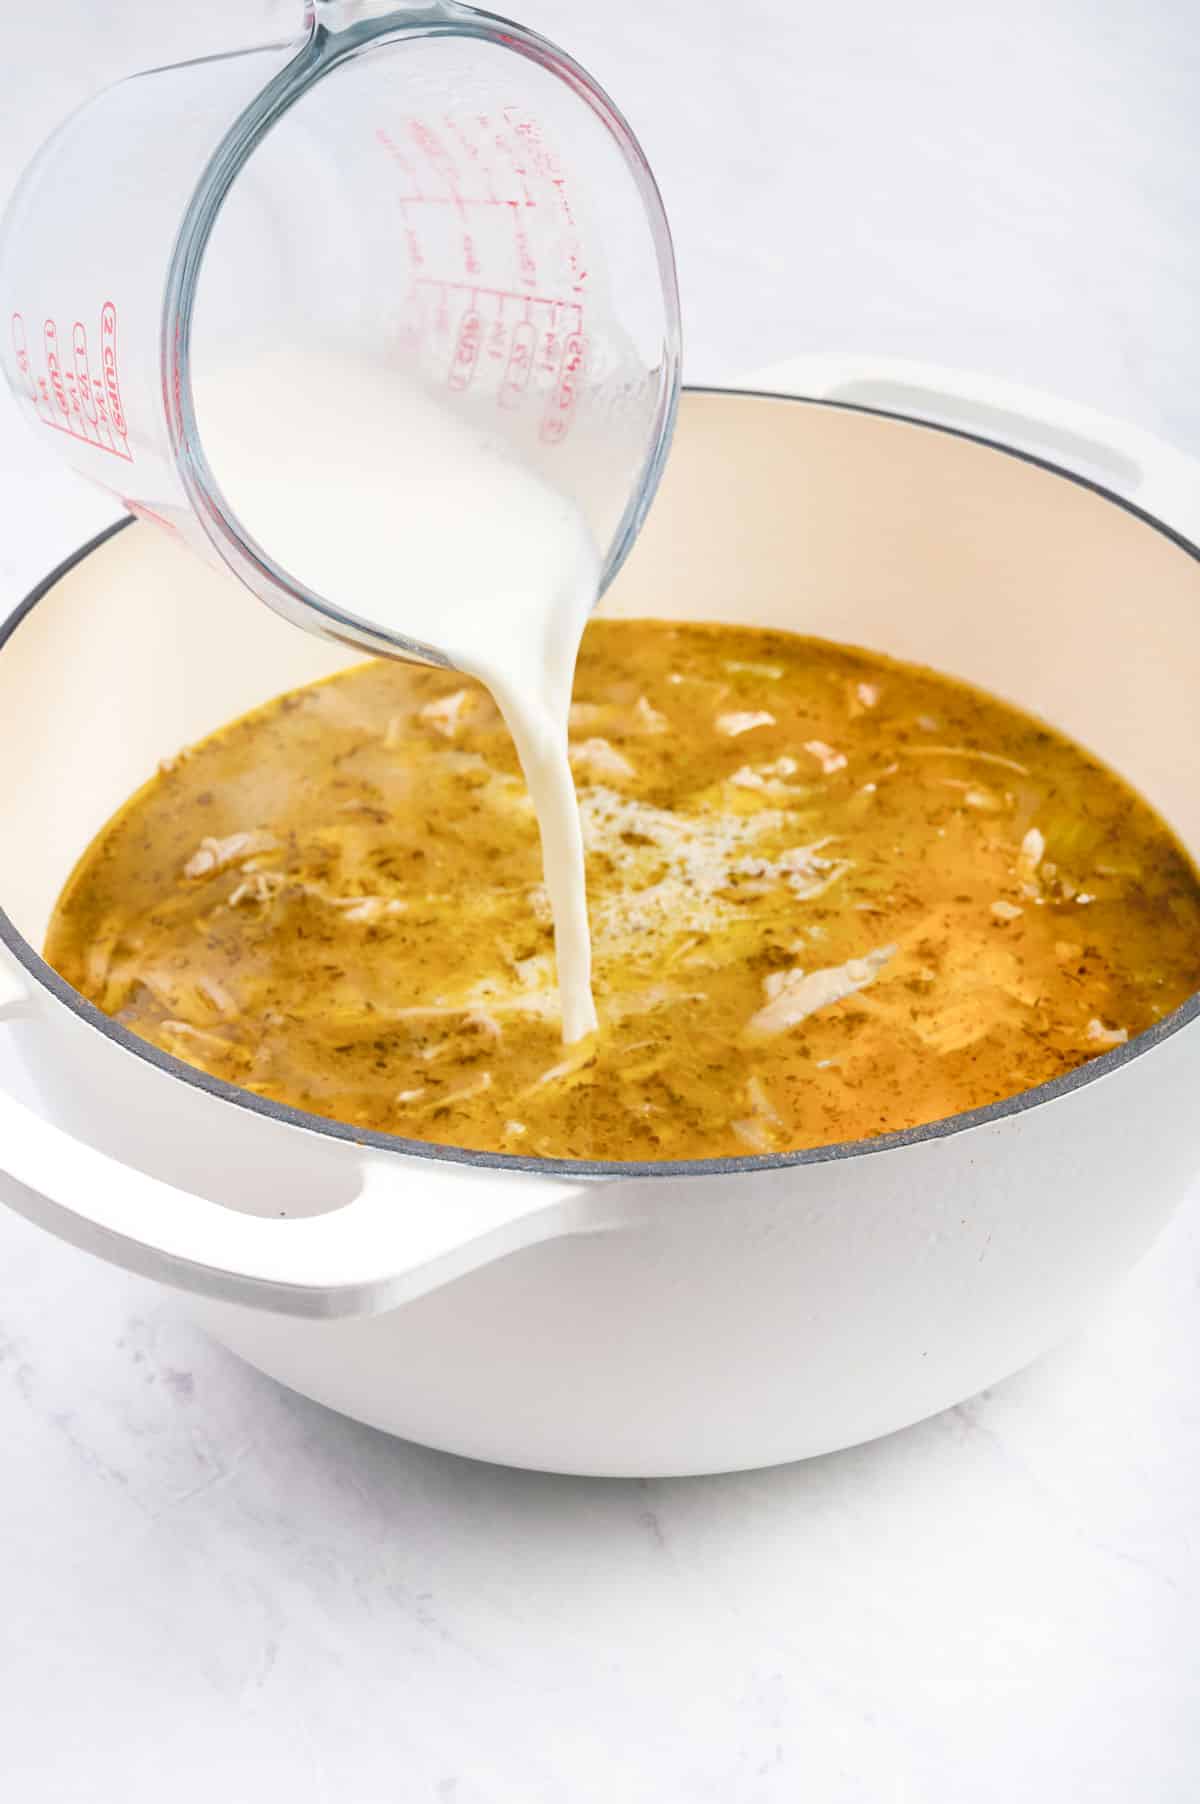 The starch slurry is poured into the soup to thicken it.